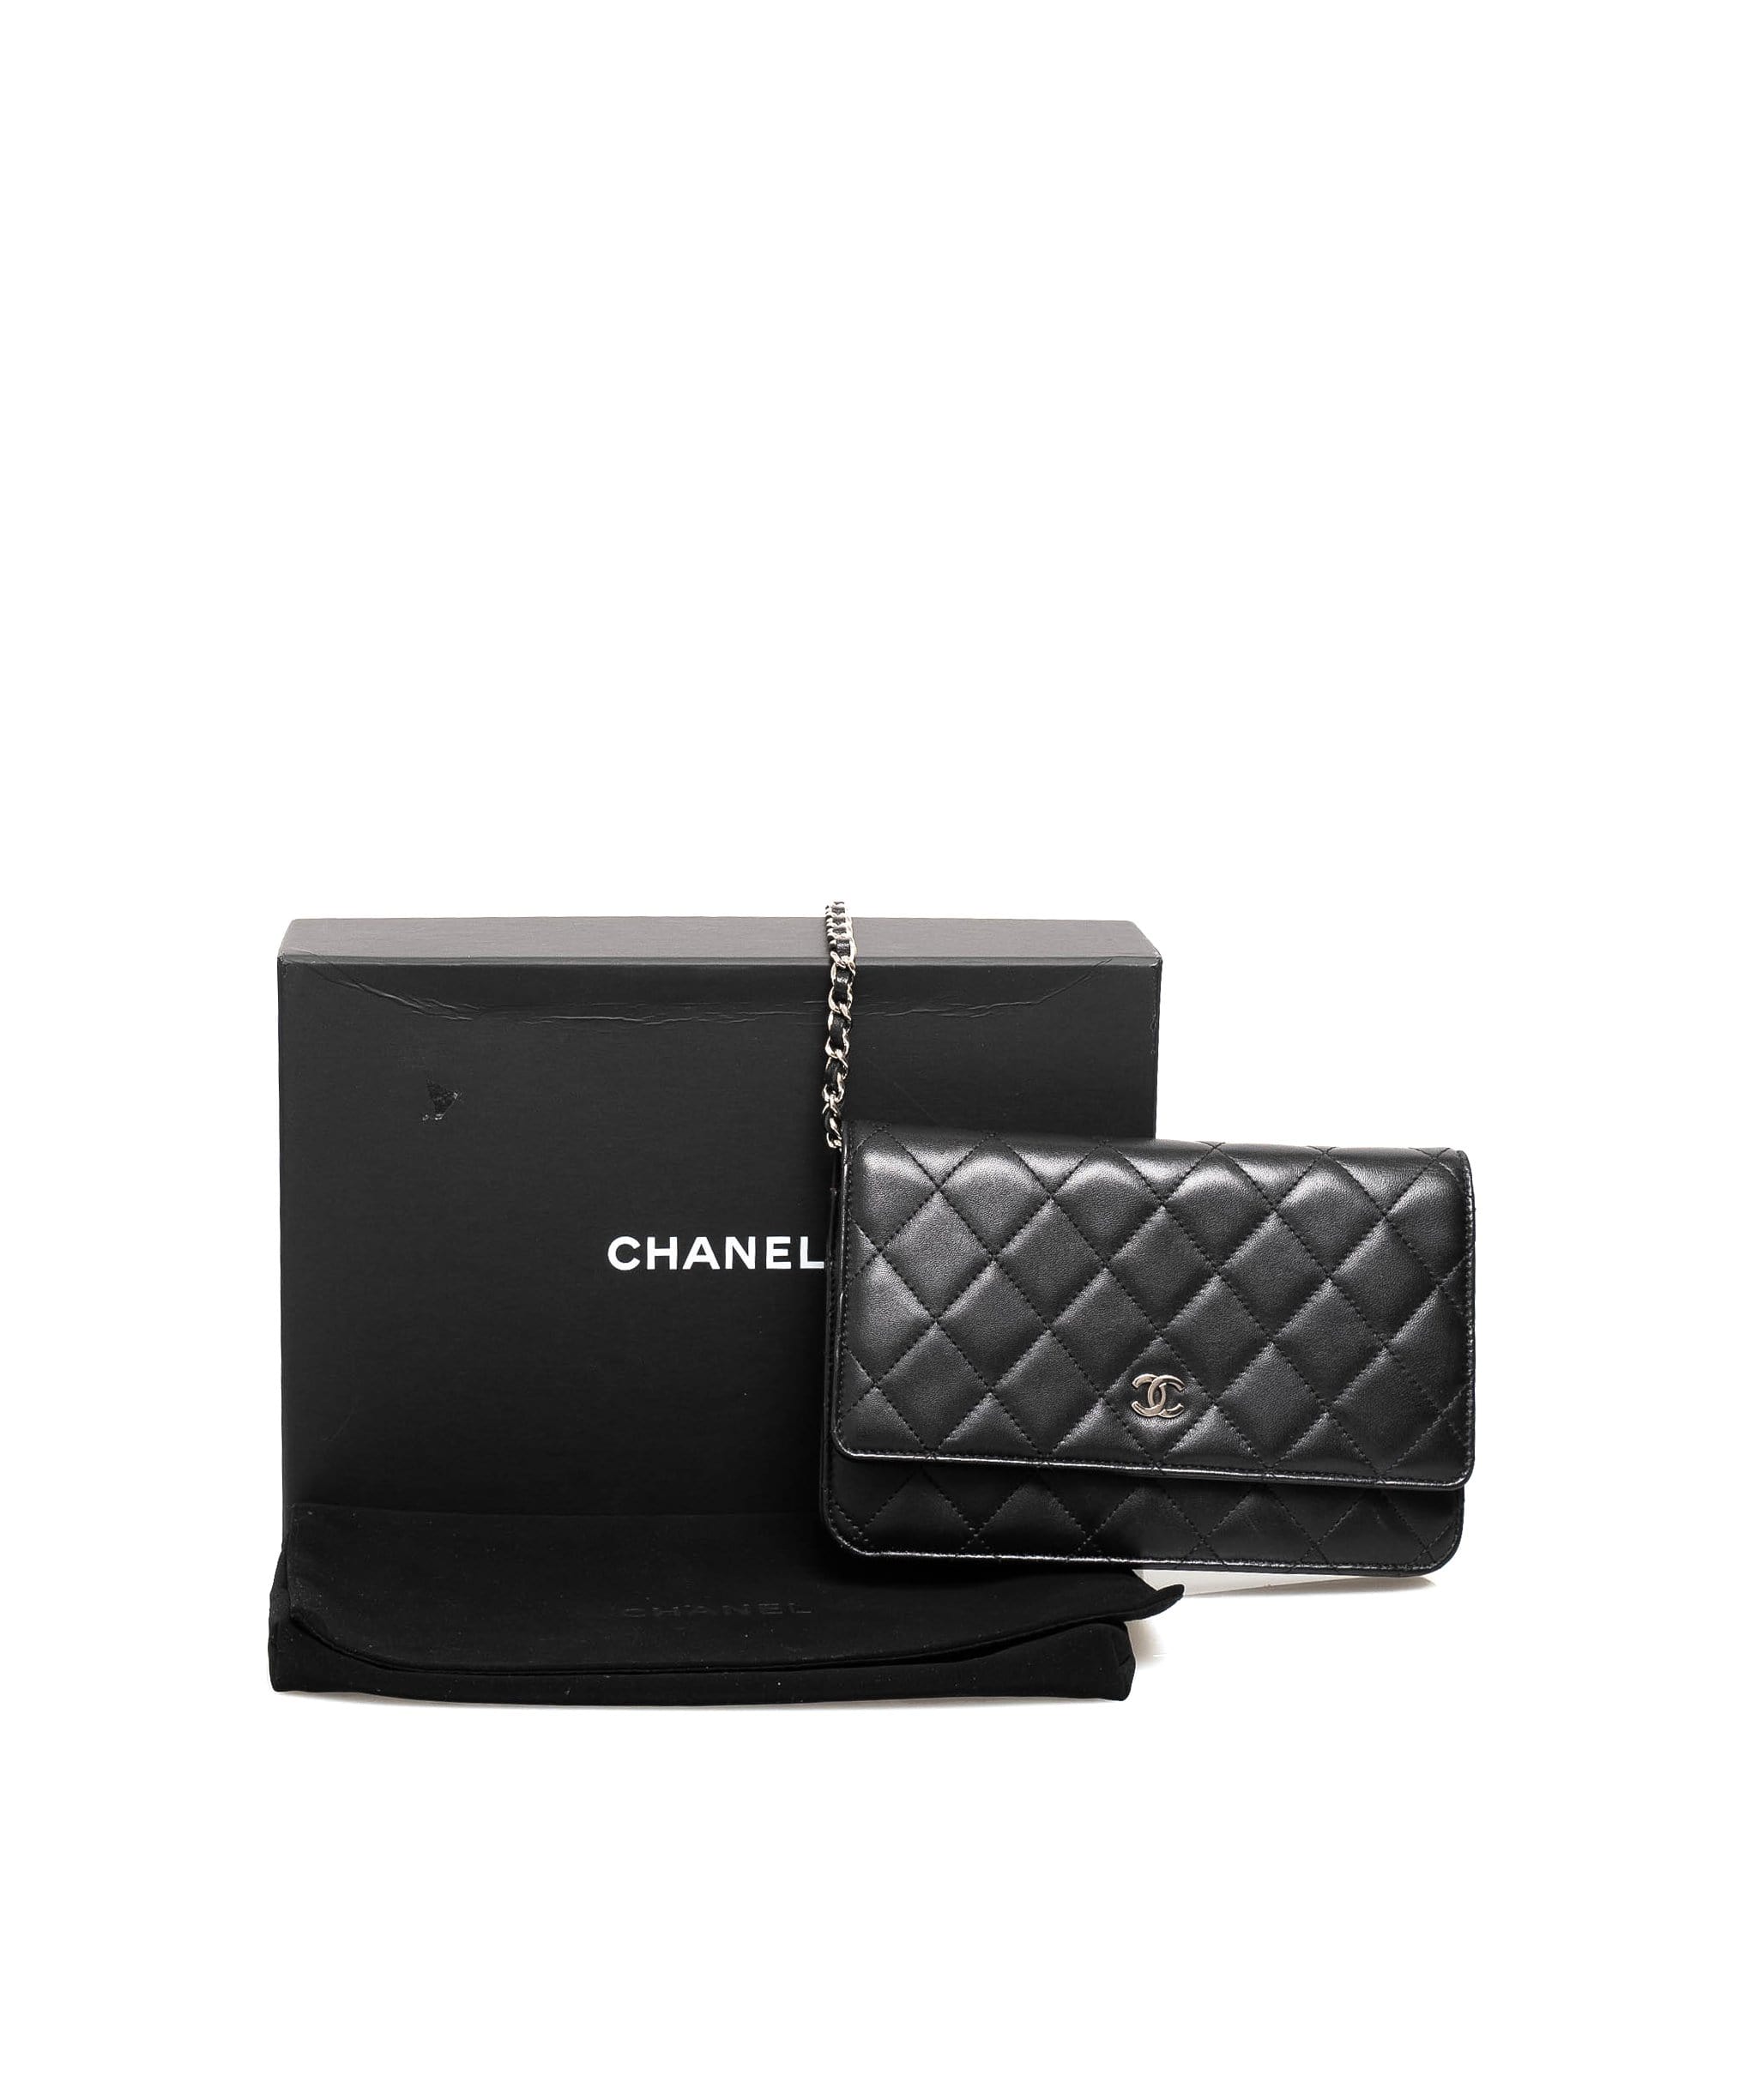 Chanel Chanel Wallet on Chain Black Lambskin with Silver Hardware  - ASL1811